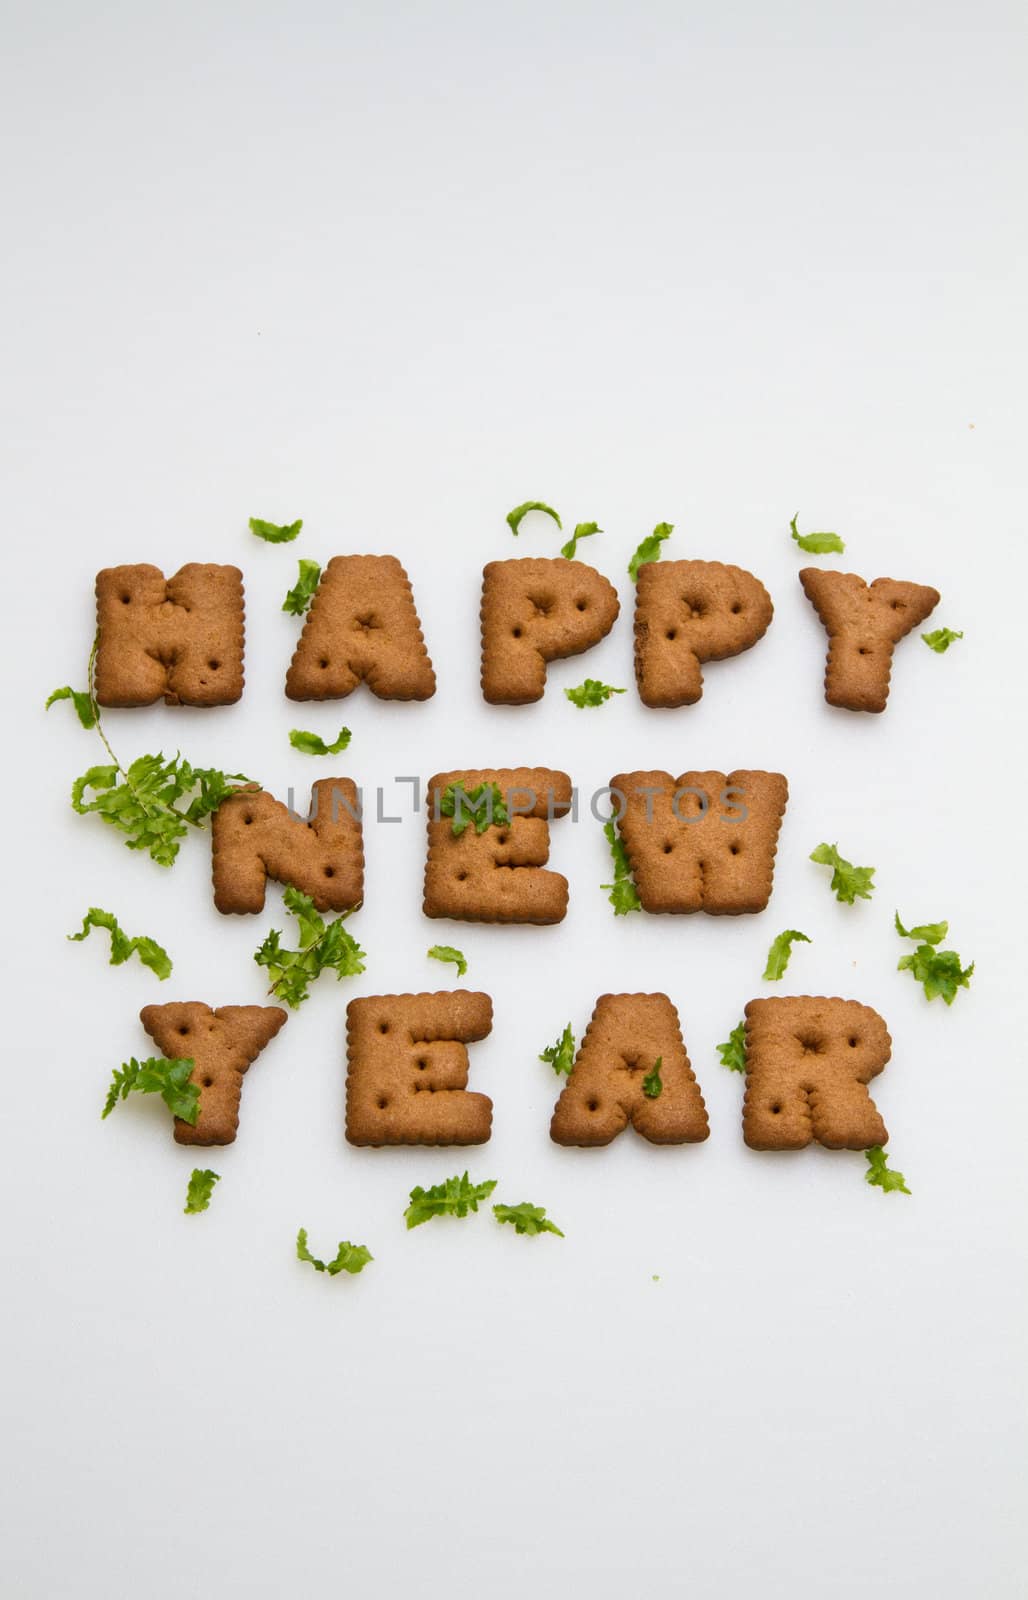 Happy New Year greeting words made by brown biscuits with green leaves on white surface in portrait orientation for background use